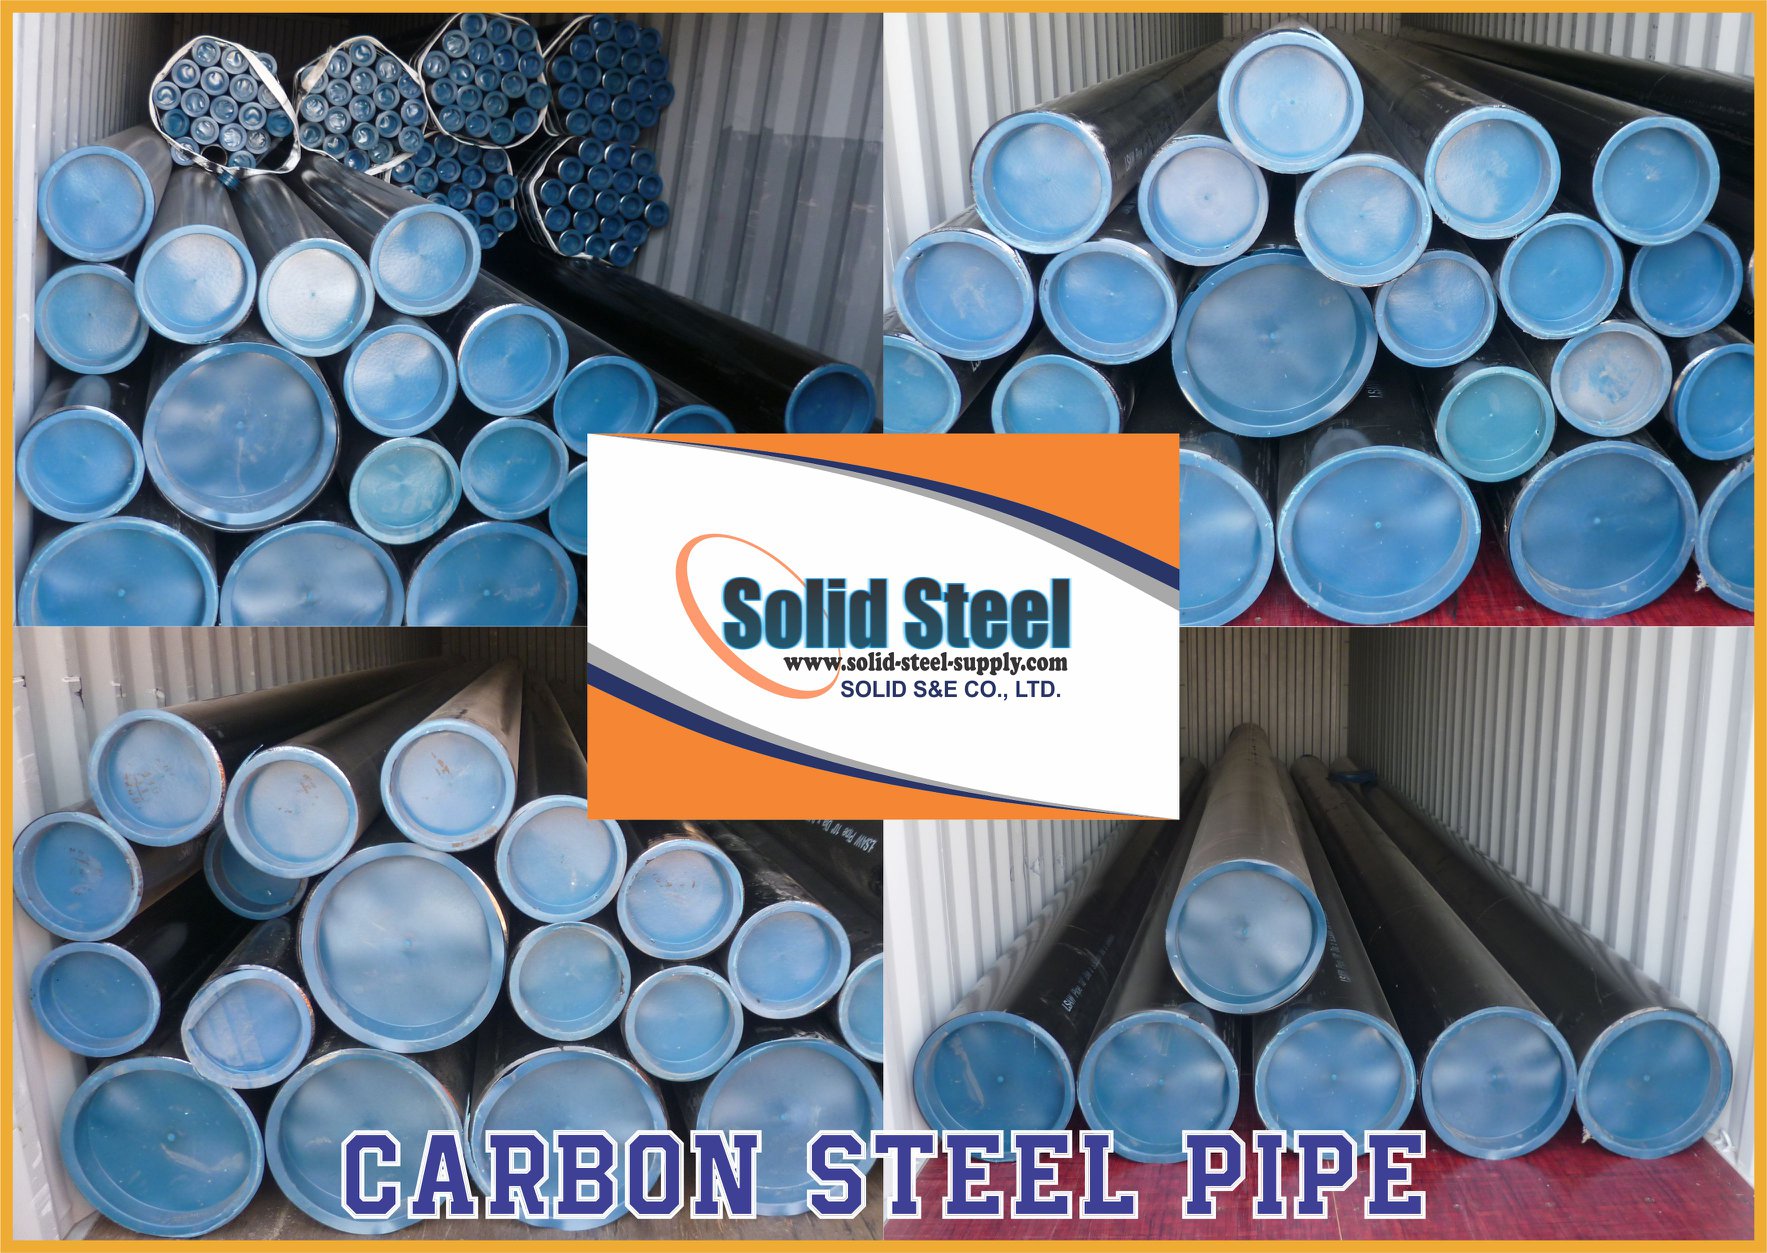 Solid Steel Supply - Structural and Construction Steel Supplier Philippines 3